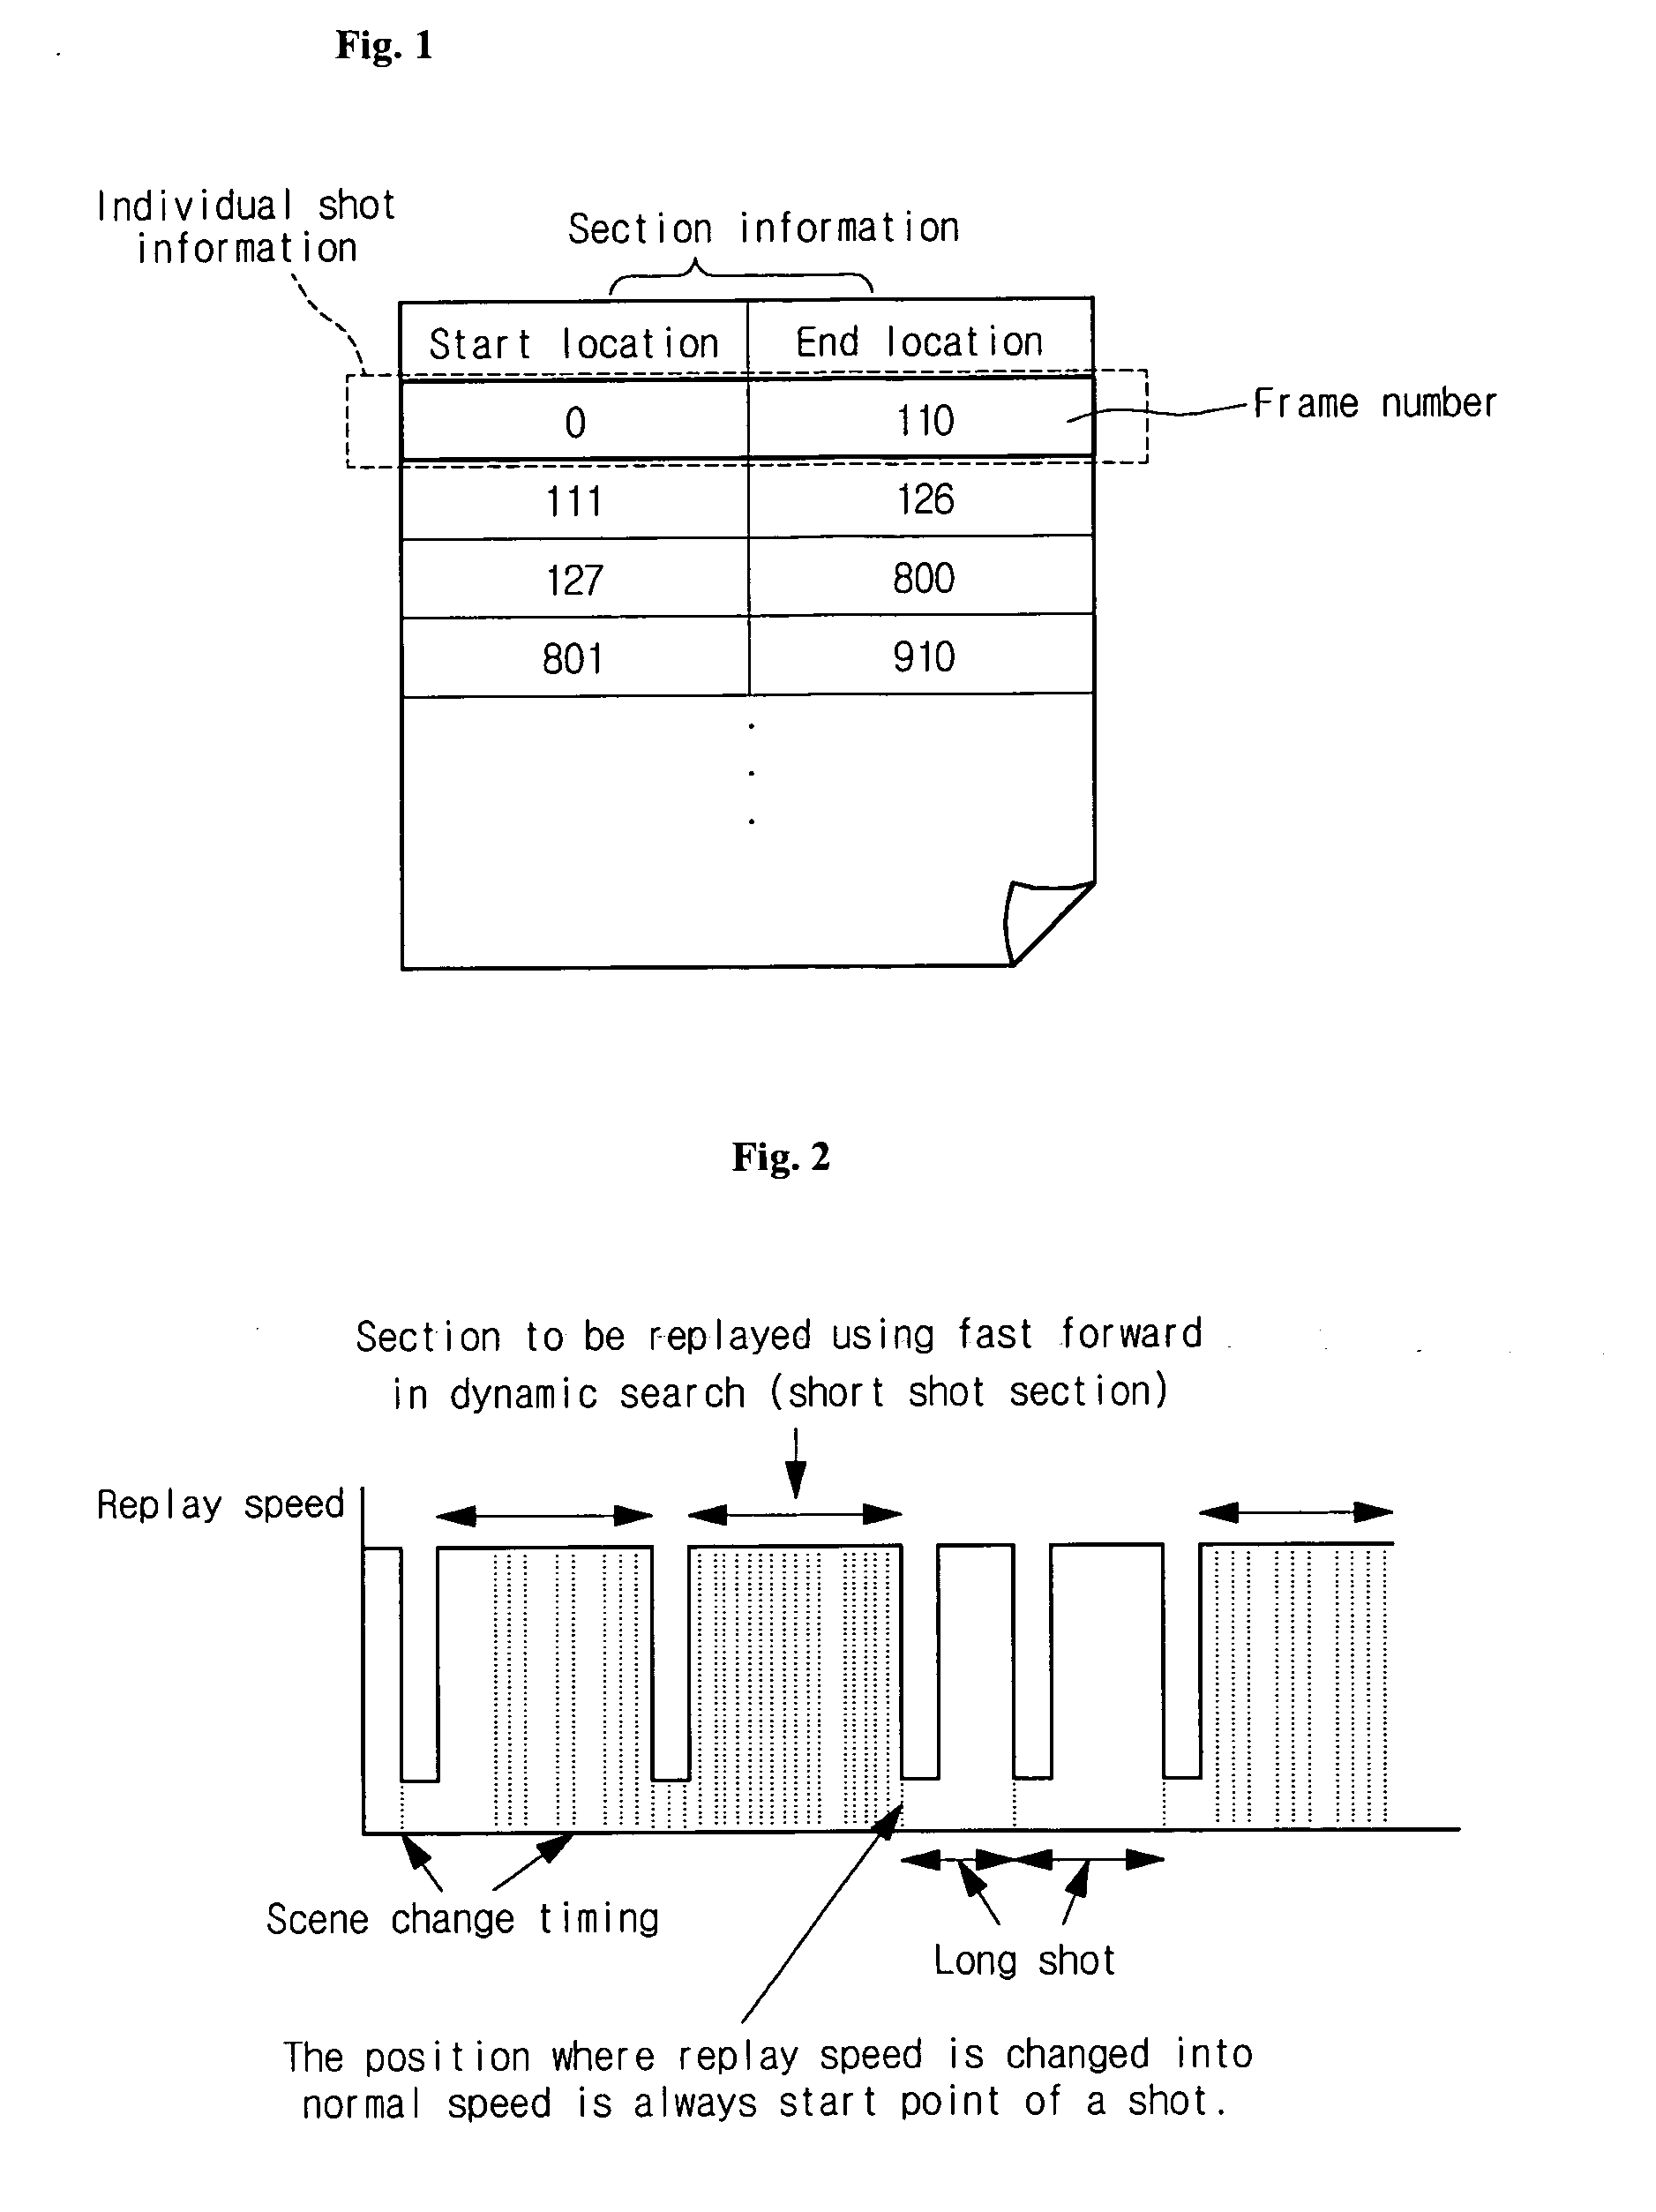 Method and apparatus for dynamic search of video contents